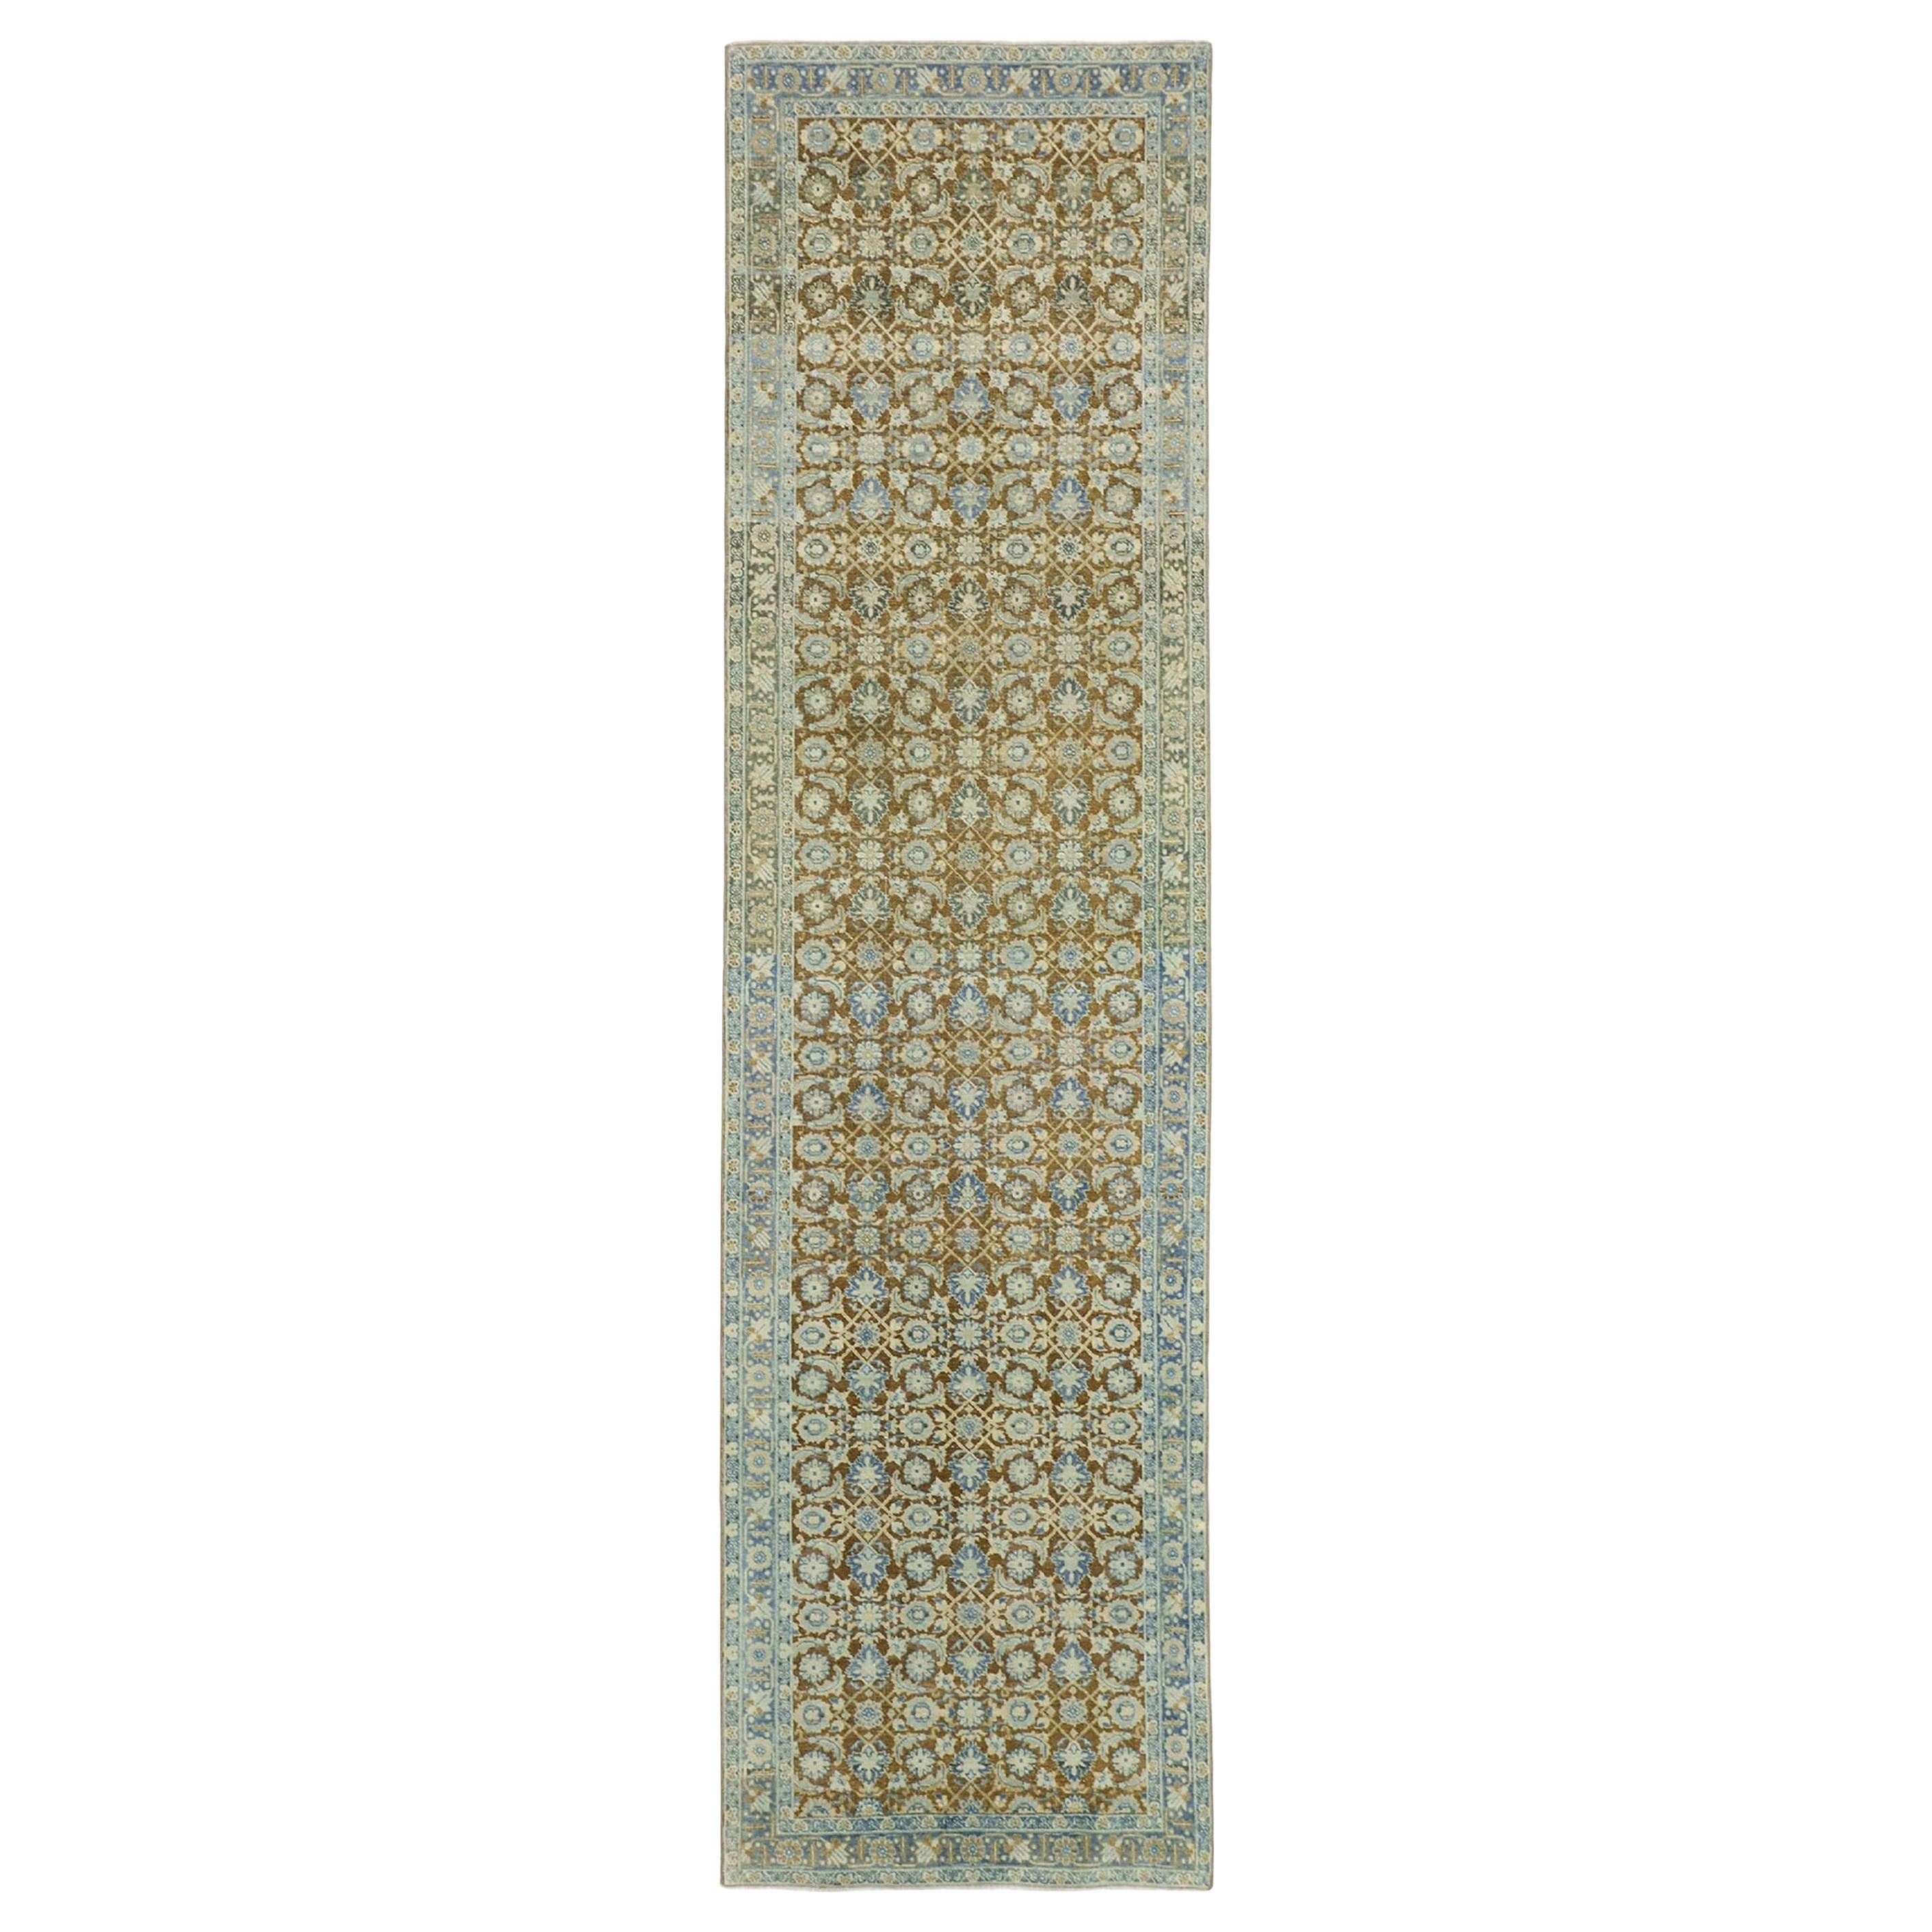 Distressed Antique Persian Tabriz Style Runner with Gustavian Style